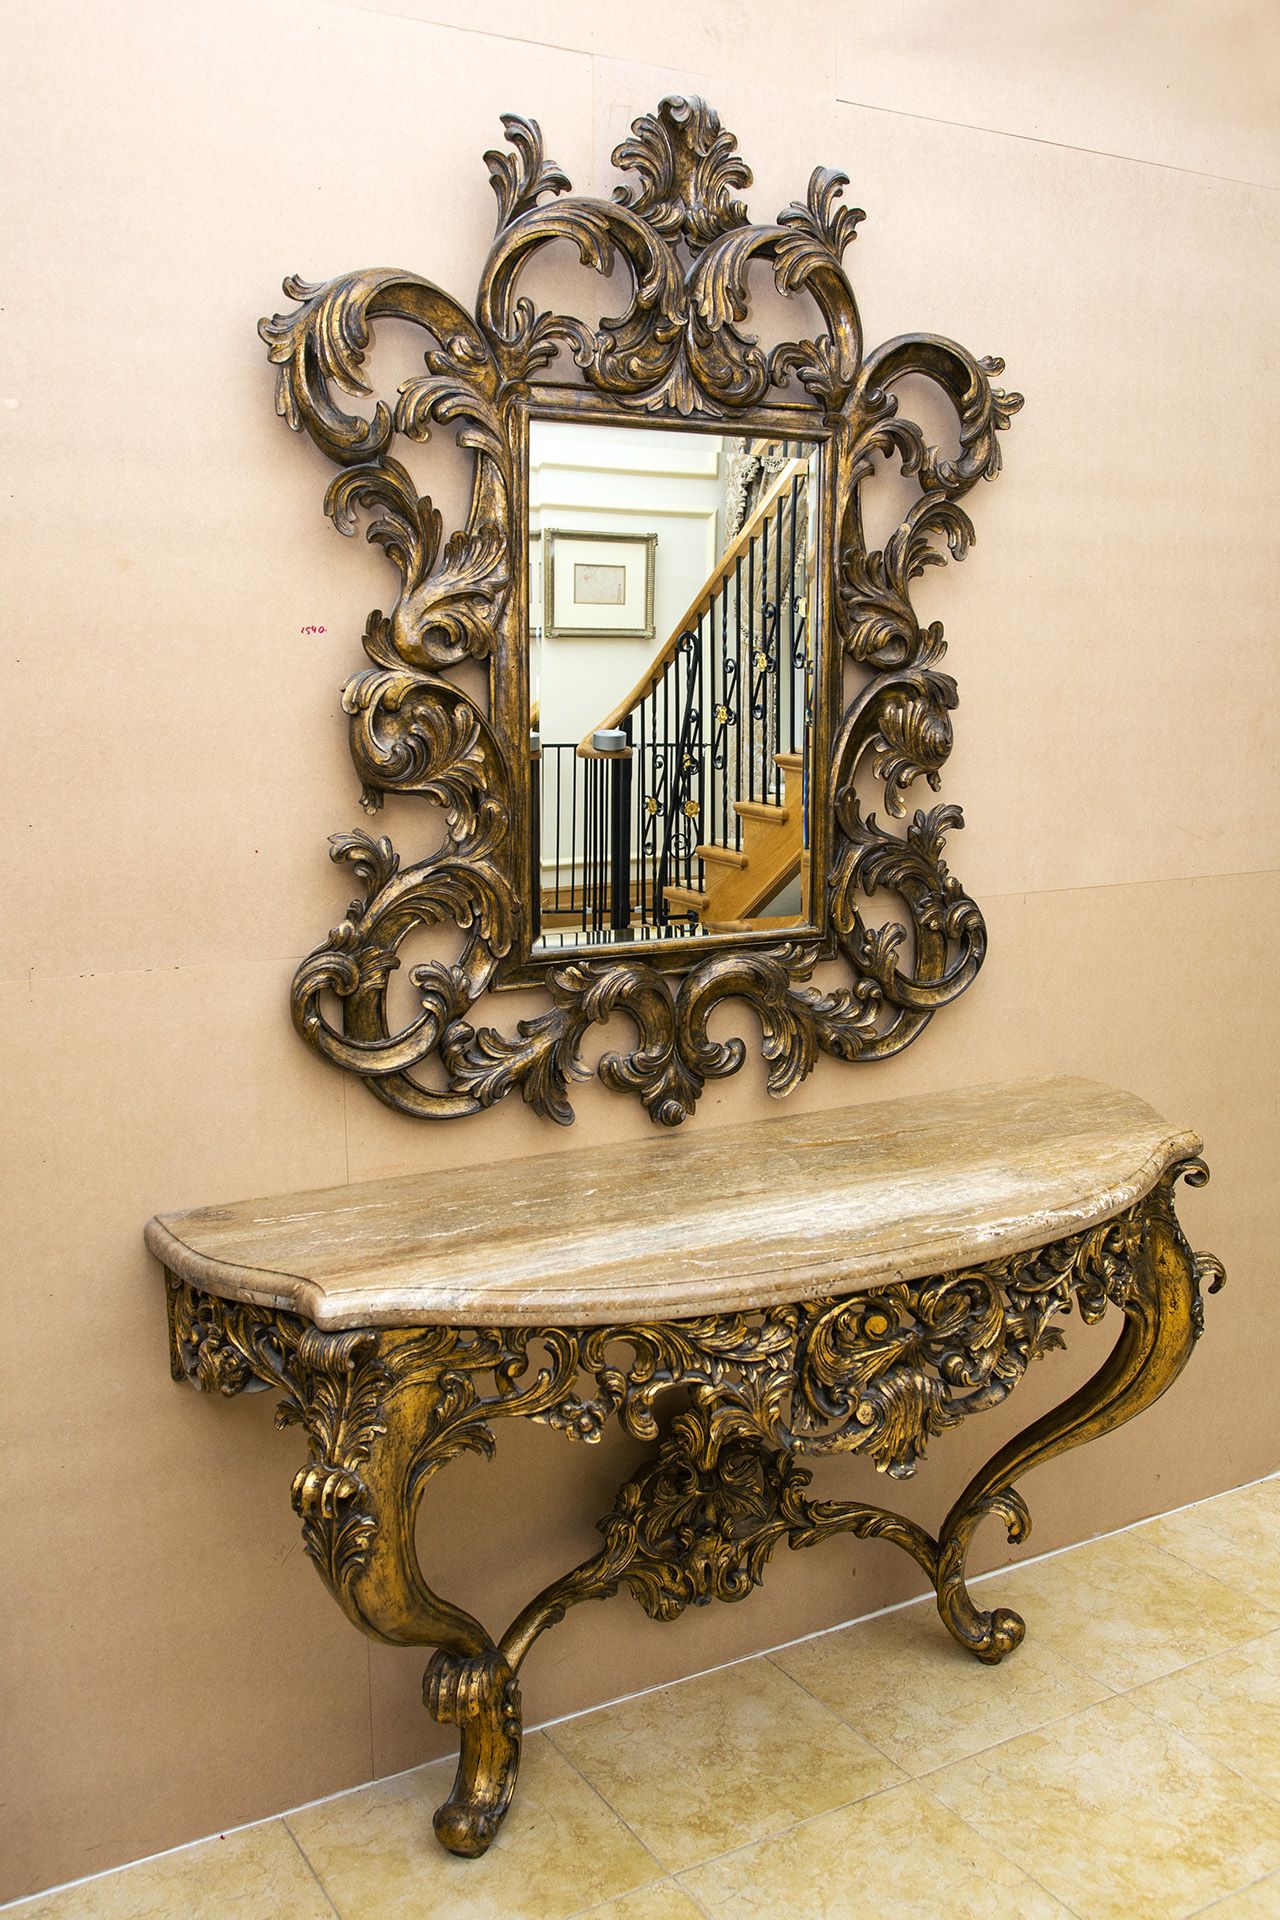 Christpher Guy Cederic Mirror Handcarved solid hardwood and hand-applied finishes bombato border - Image 4 of 6